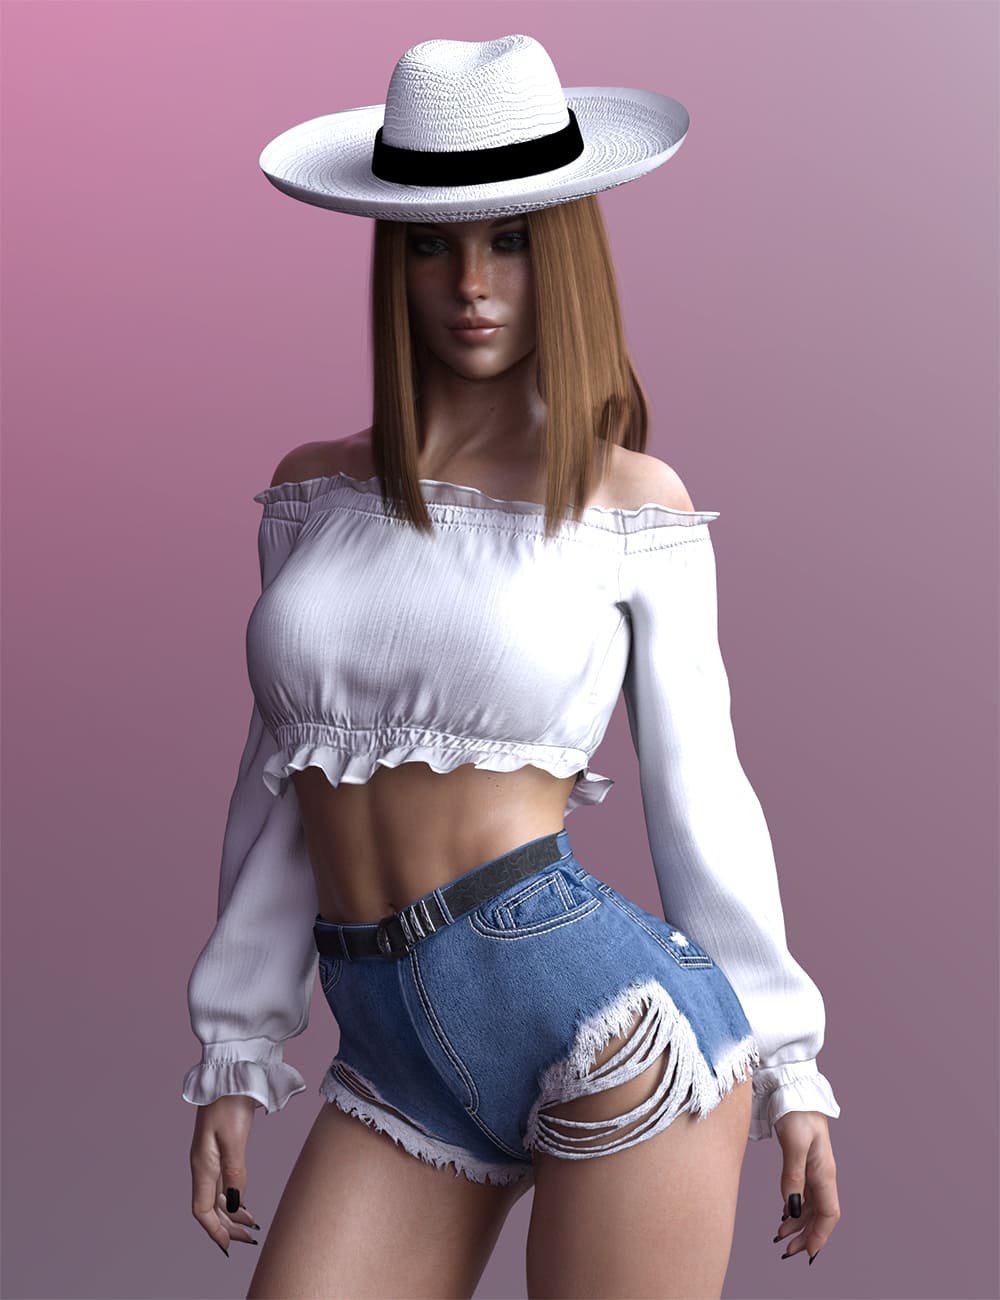 X-Fashion Foxy Lady Outfit for Genesis 8 and 8.1 Females_DAZ3D下载站